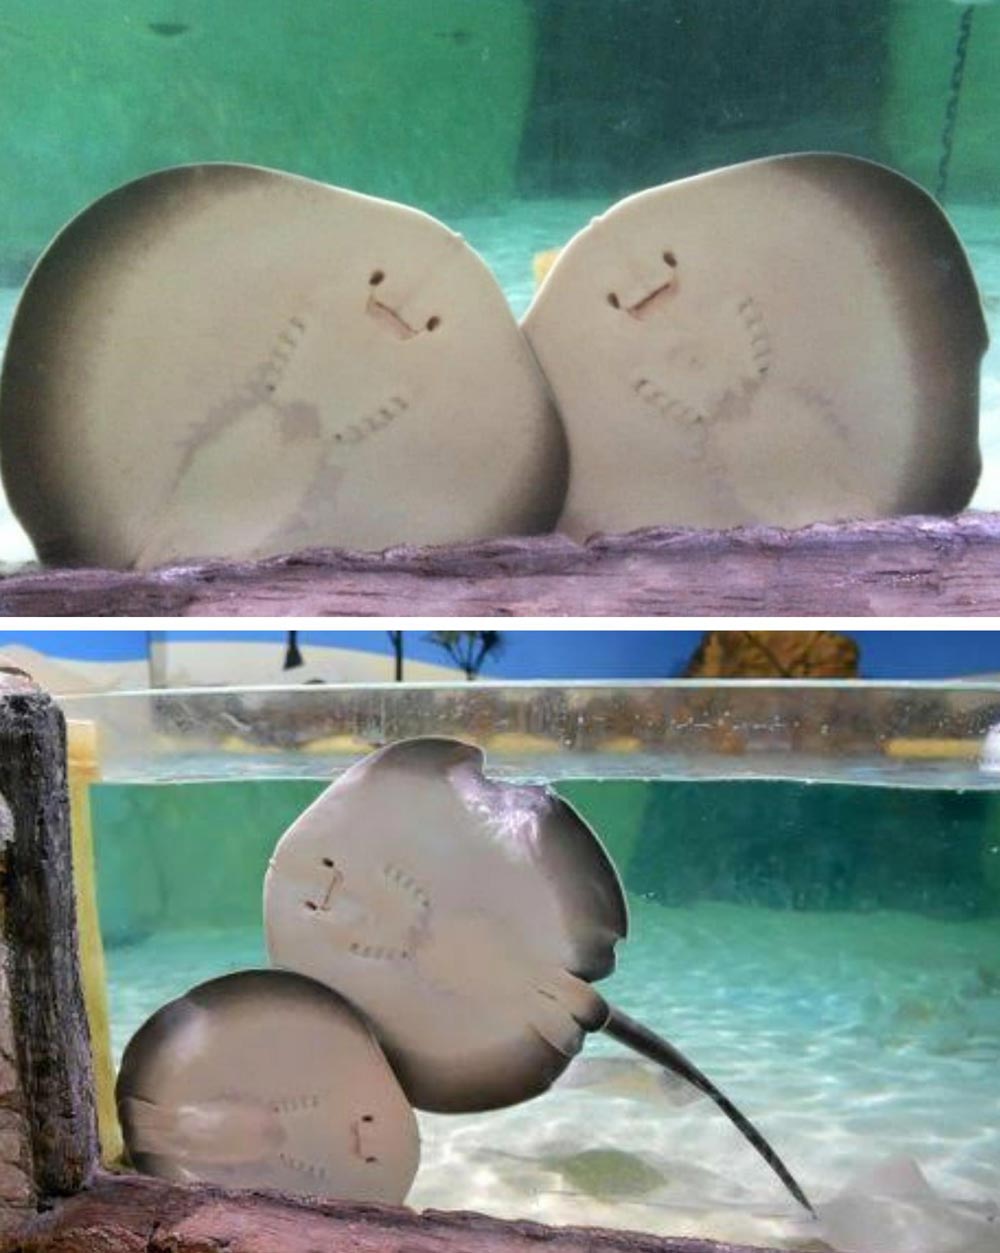 Two-month old baby sting ray sisters in Sunshine Coast aquarium, Australia, named Cookies and Cream